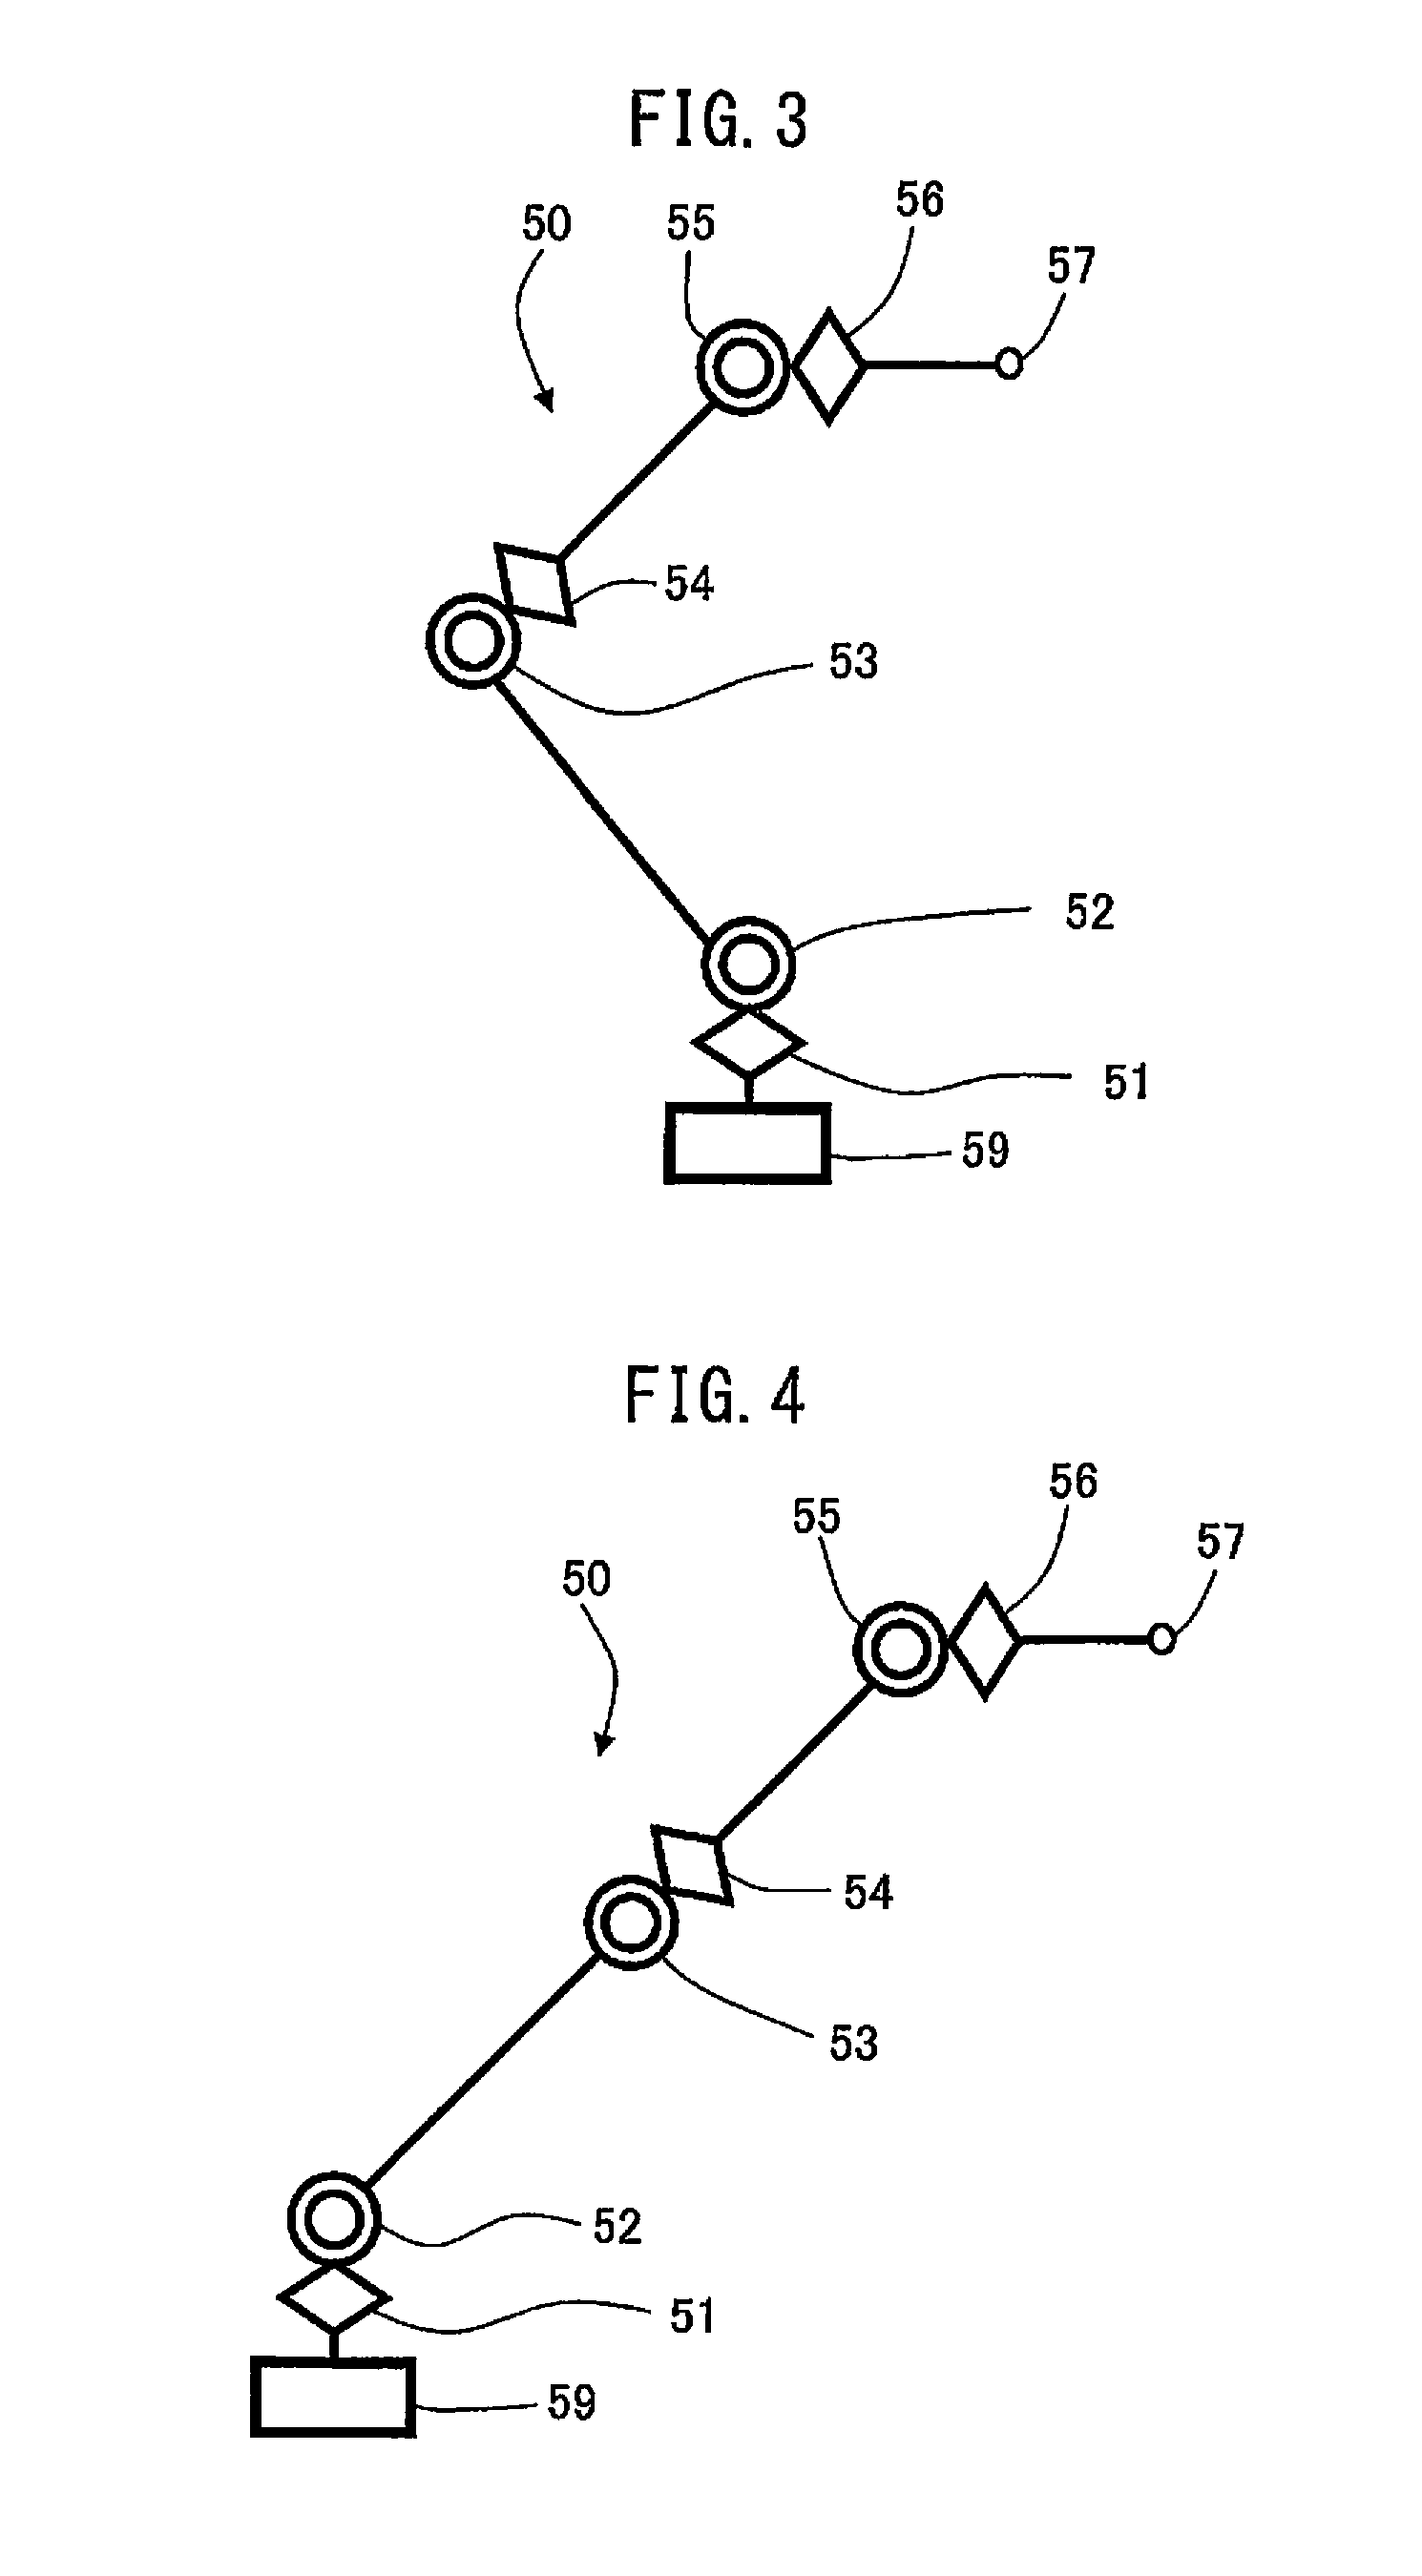 Robot control device for controlling robot moved according to applied force